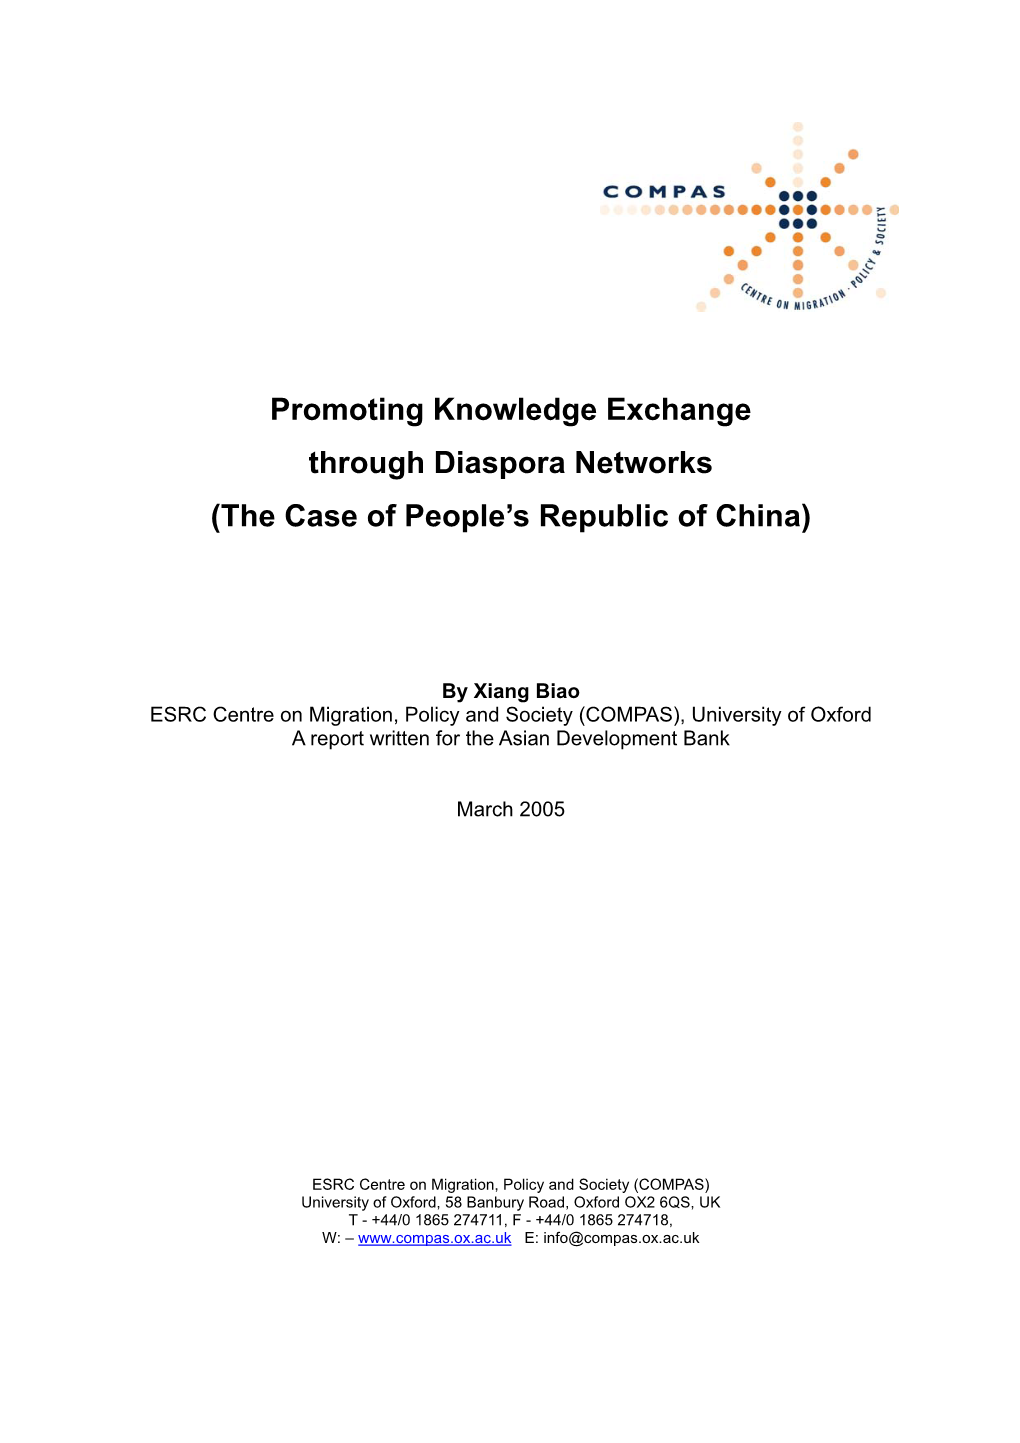 Promoting Knowledge Exchange Through Diaspora Networks (The Case of People’S Republic of China)